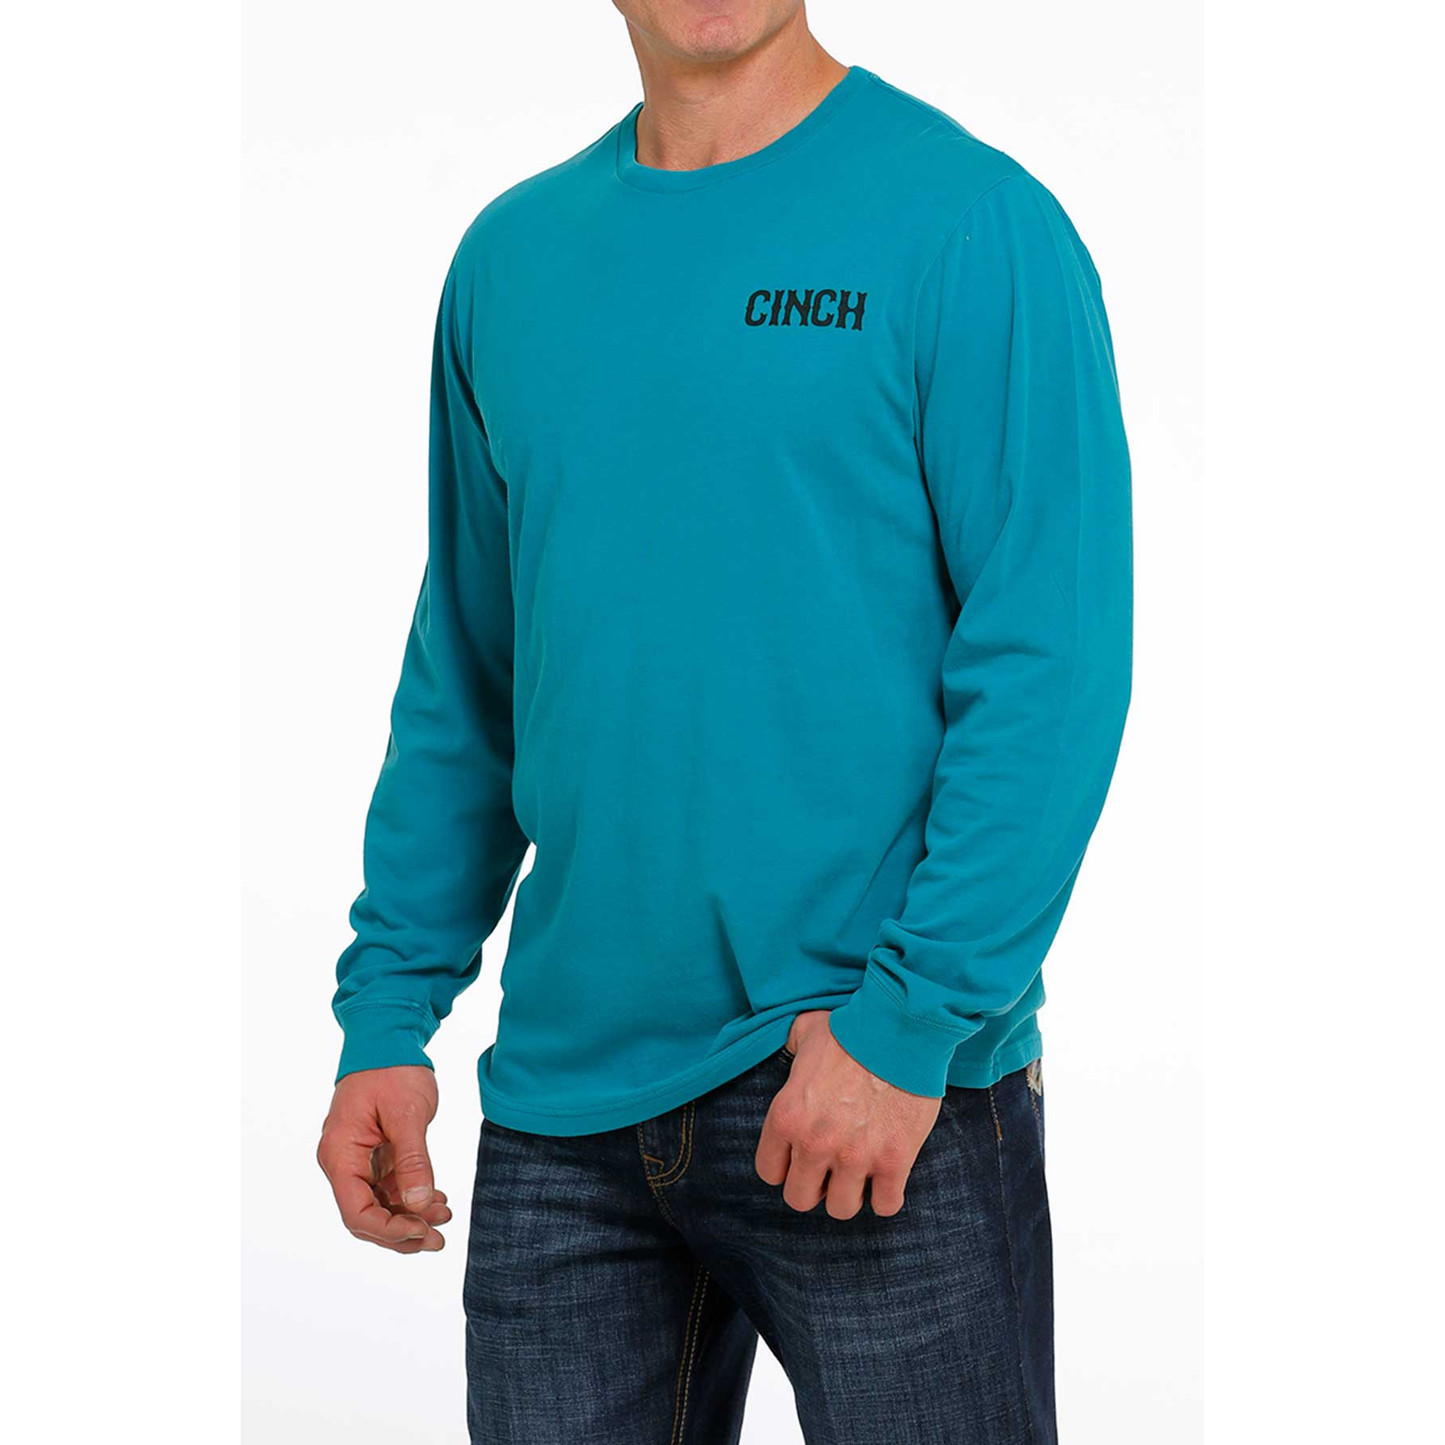 Cinch® Men's Teal "Lead This Life" Graphic T-Shirt MTT1721006